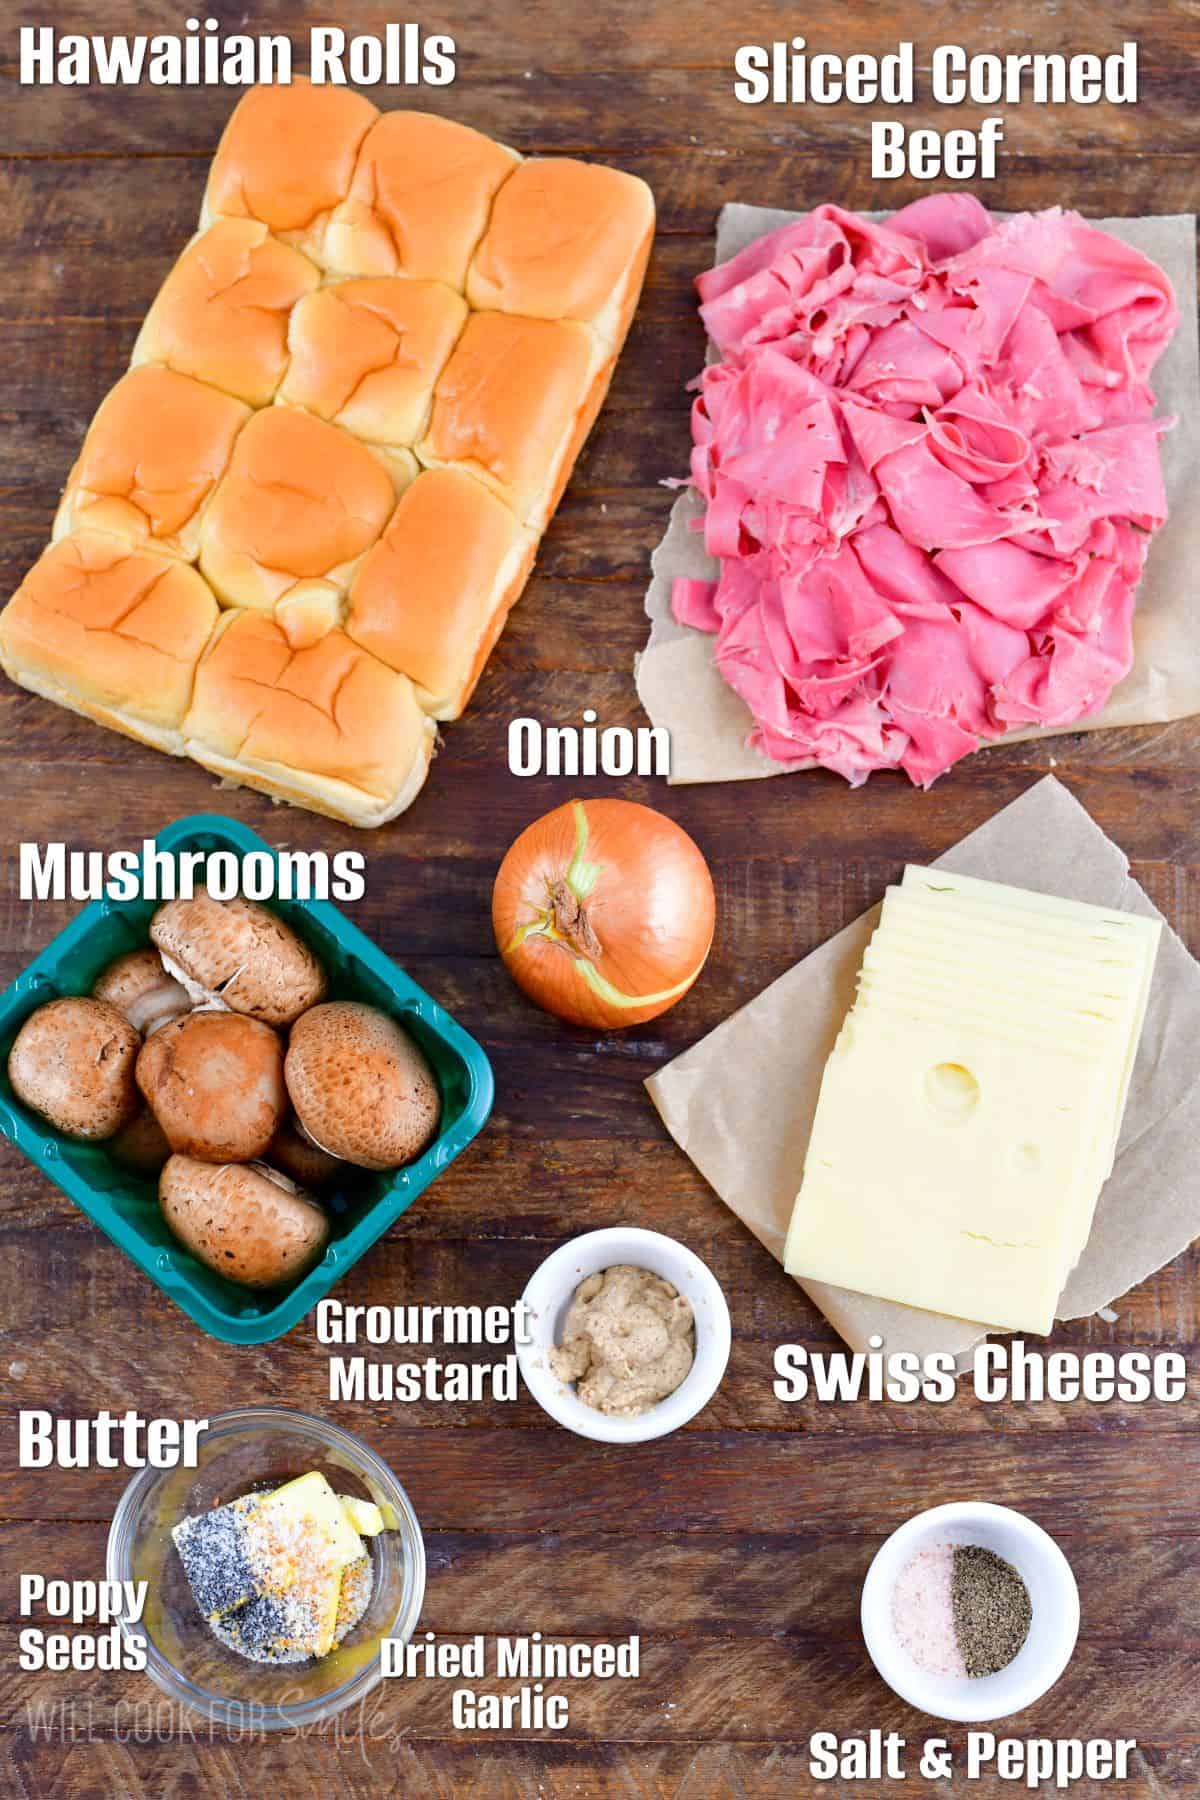 Labeled ingredients for corned beef sliders on a wood surface.